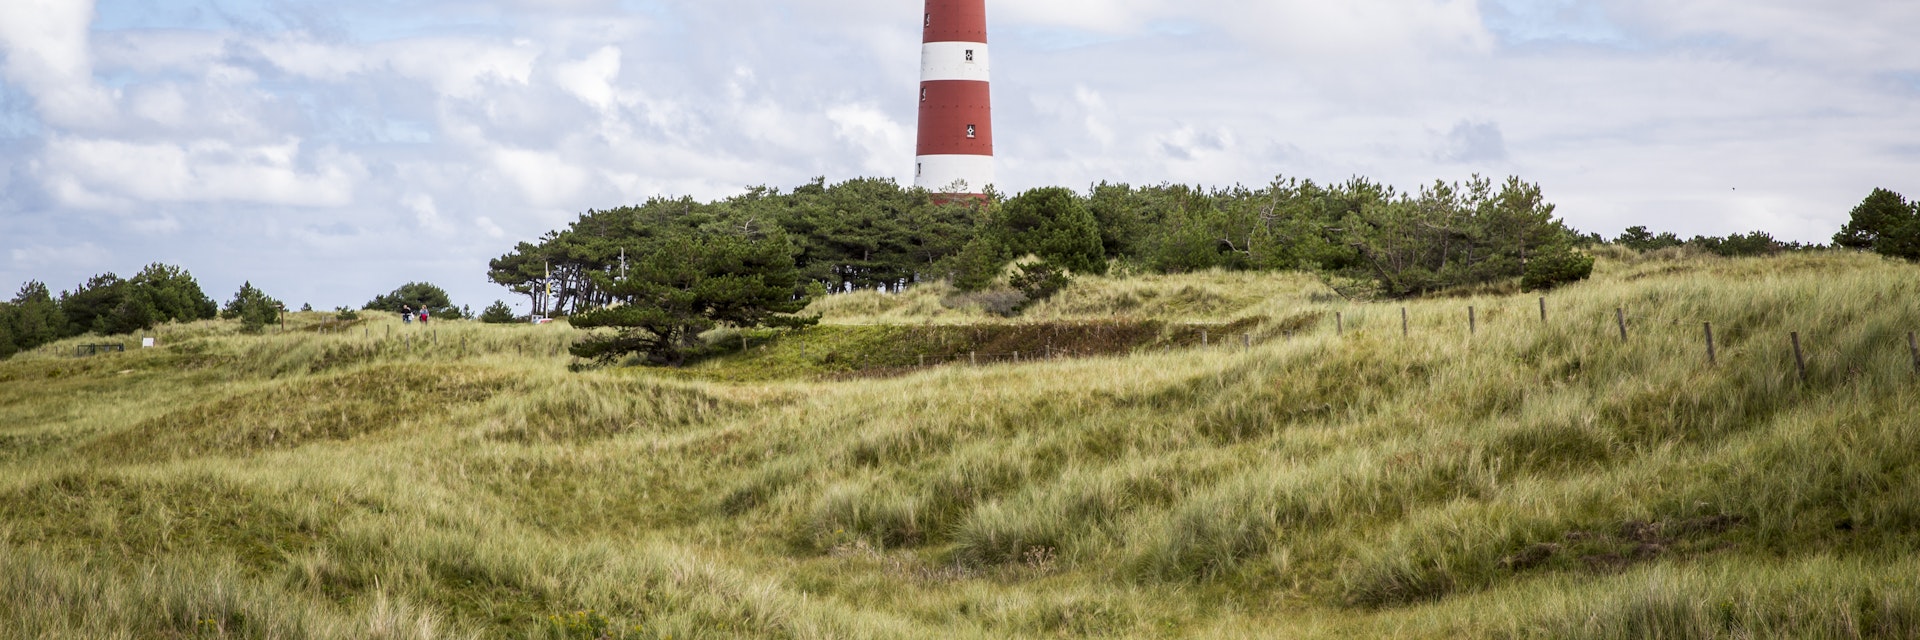 view of the Ameland Lighthouse, known as Bornrif, is a lighthouse on the Dutch island Ameland, one of the Frisian Islands, on the edge of the North Sea, The Netherlands